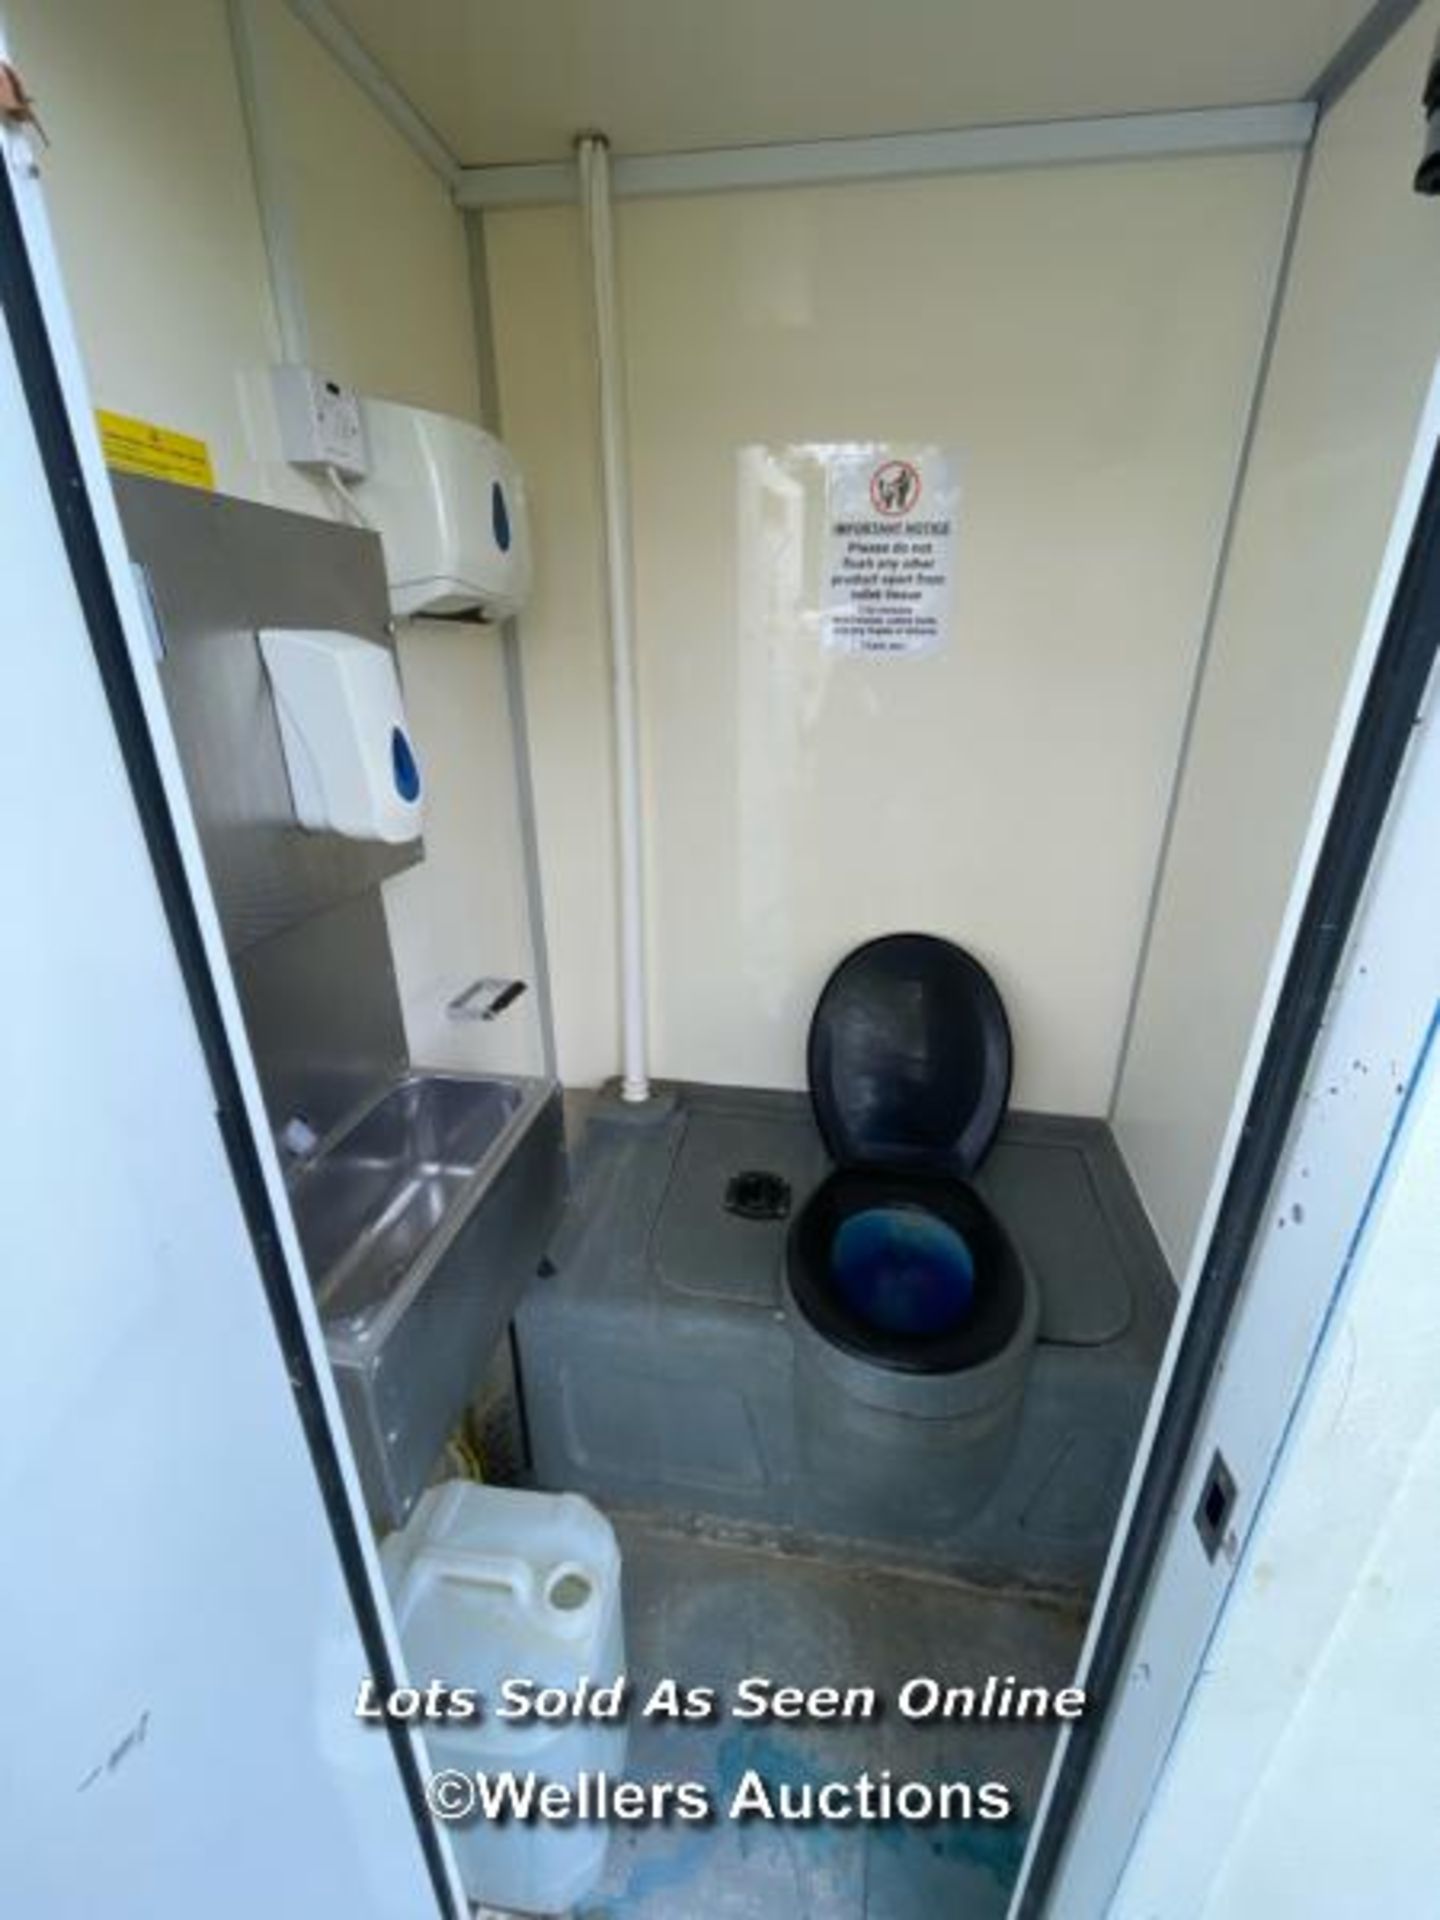 6 PERSON 12 X 7.5FT AJC EASY CABIN TOWABLE WELFARE UNIT, INCLUDES WASH BASIN, KETTLE, MICROWAVE, - Image 11 of 18